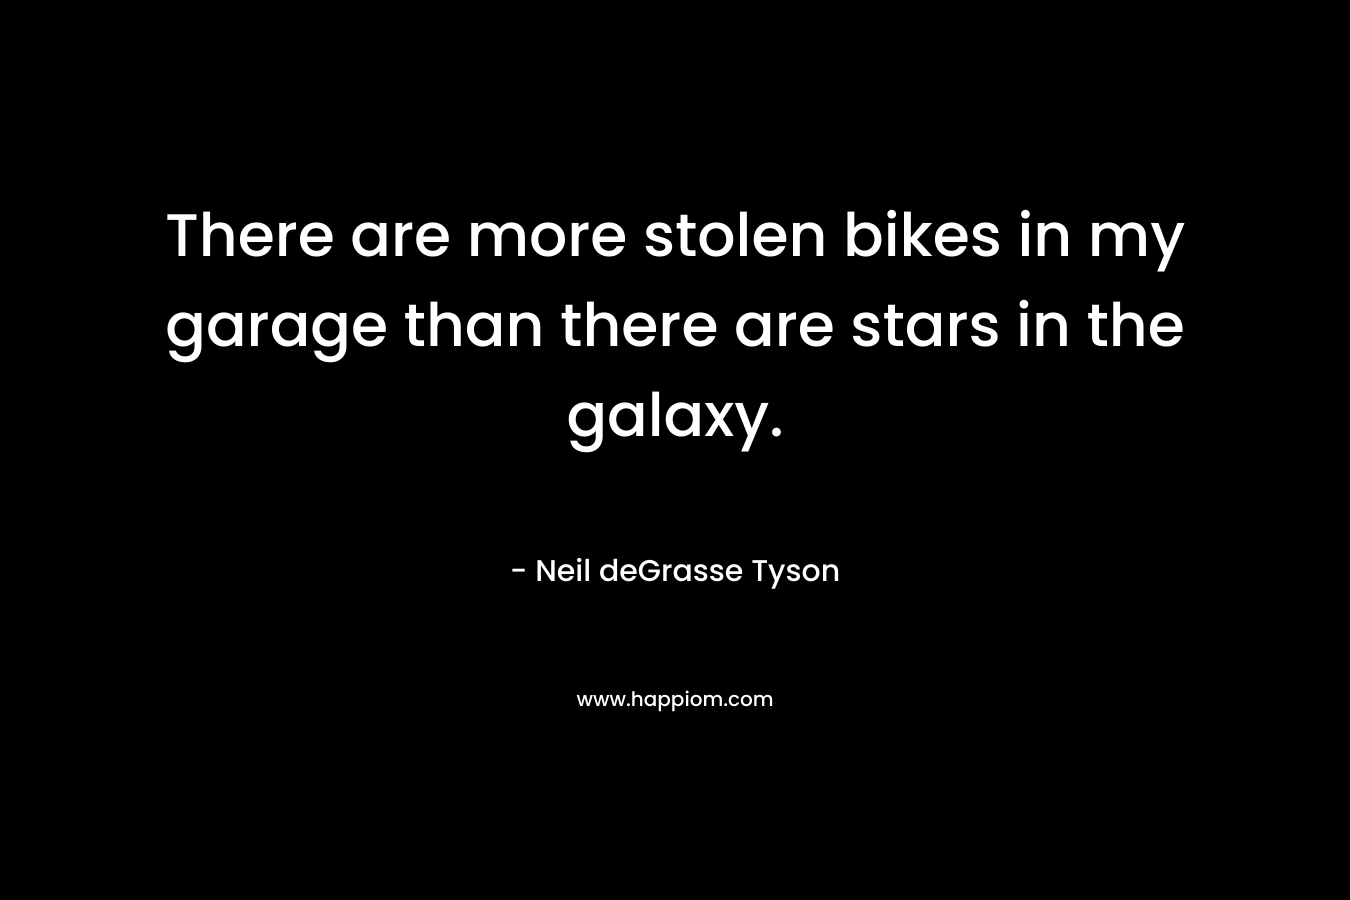 There are more stolen bikes in my garage than there are stars in the galaxy. – Neil deGrasse Tyson